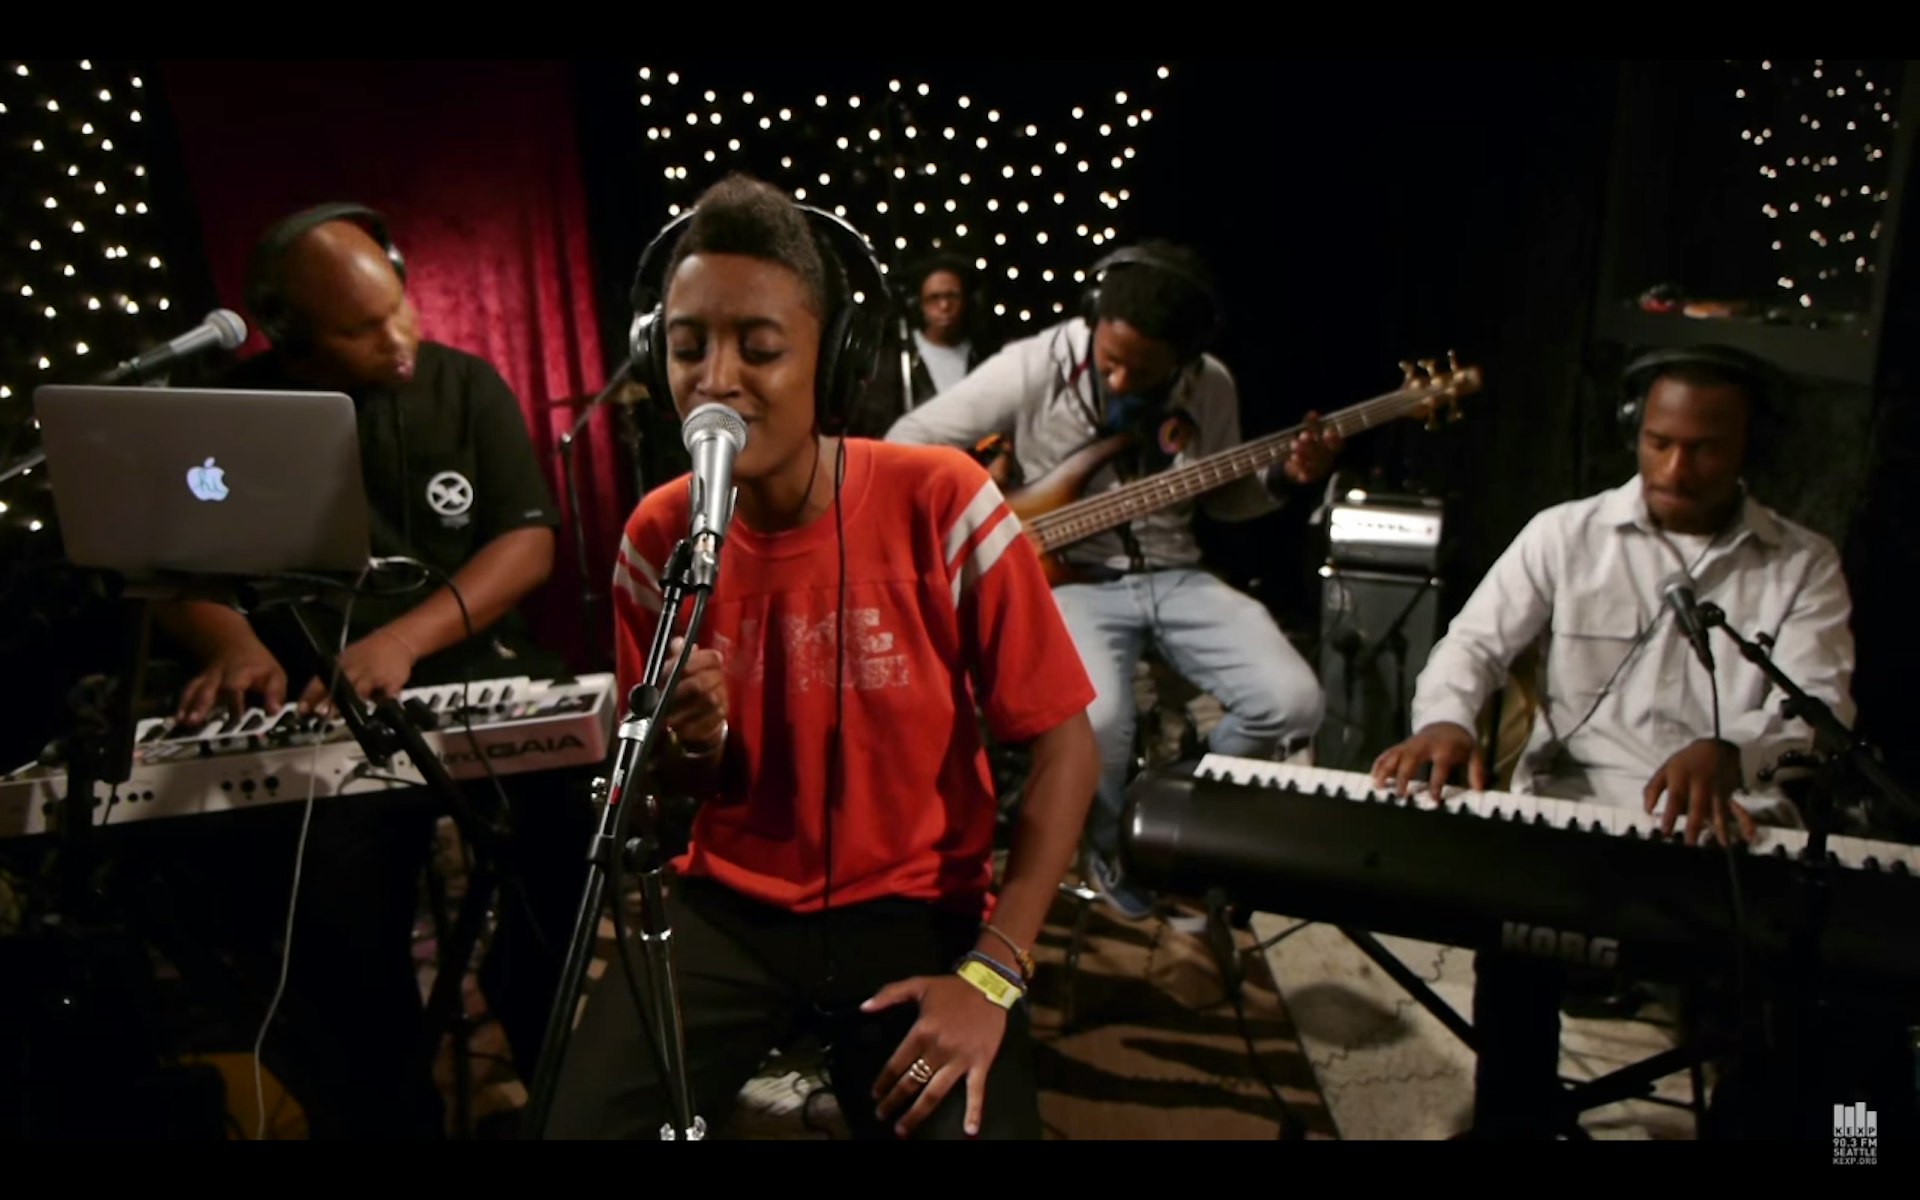 Get to know KEXP: the indie radio station putting out sweet in-studio sessions